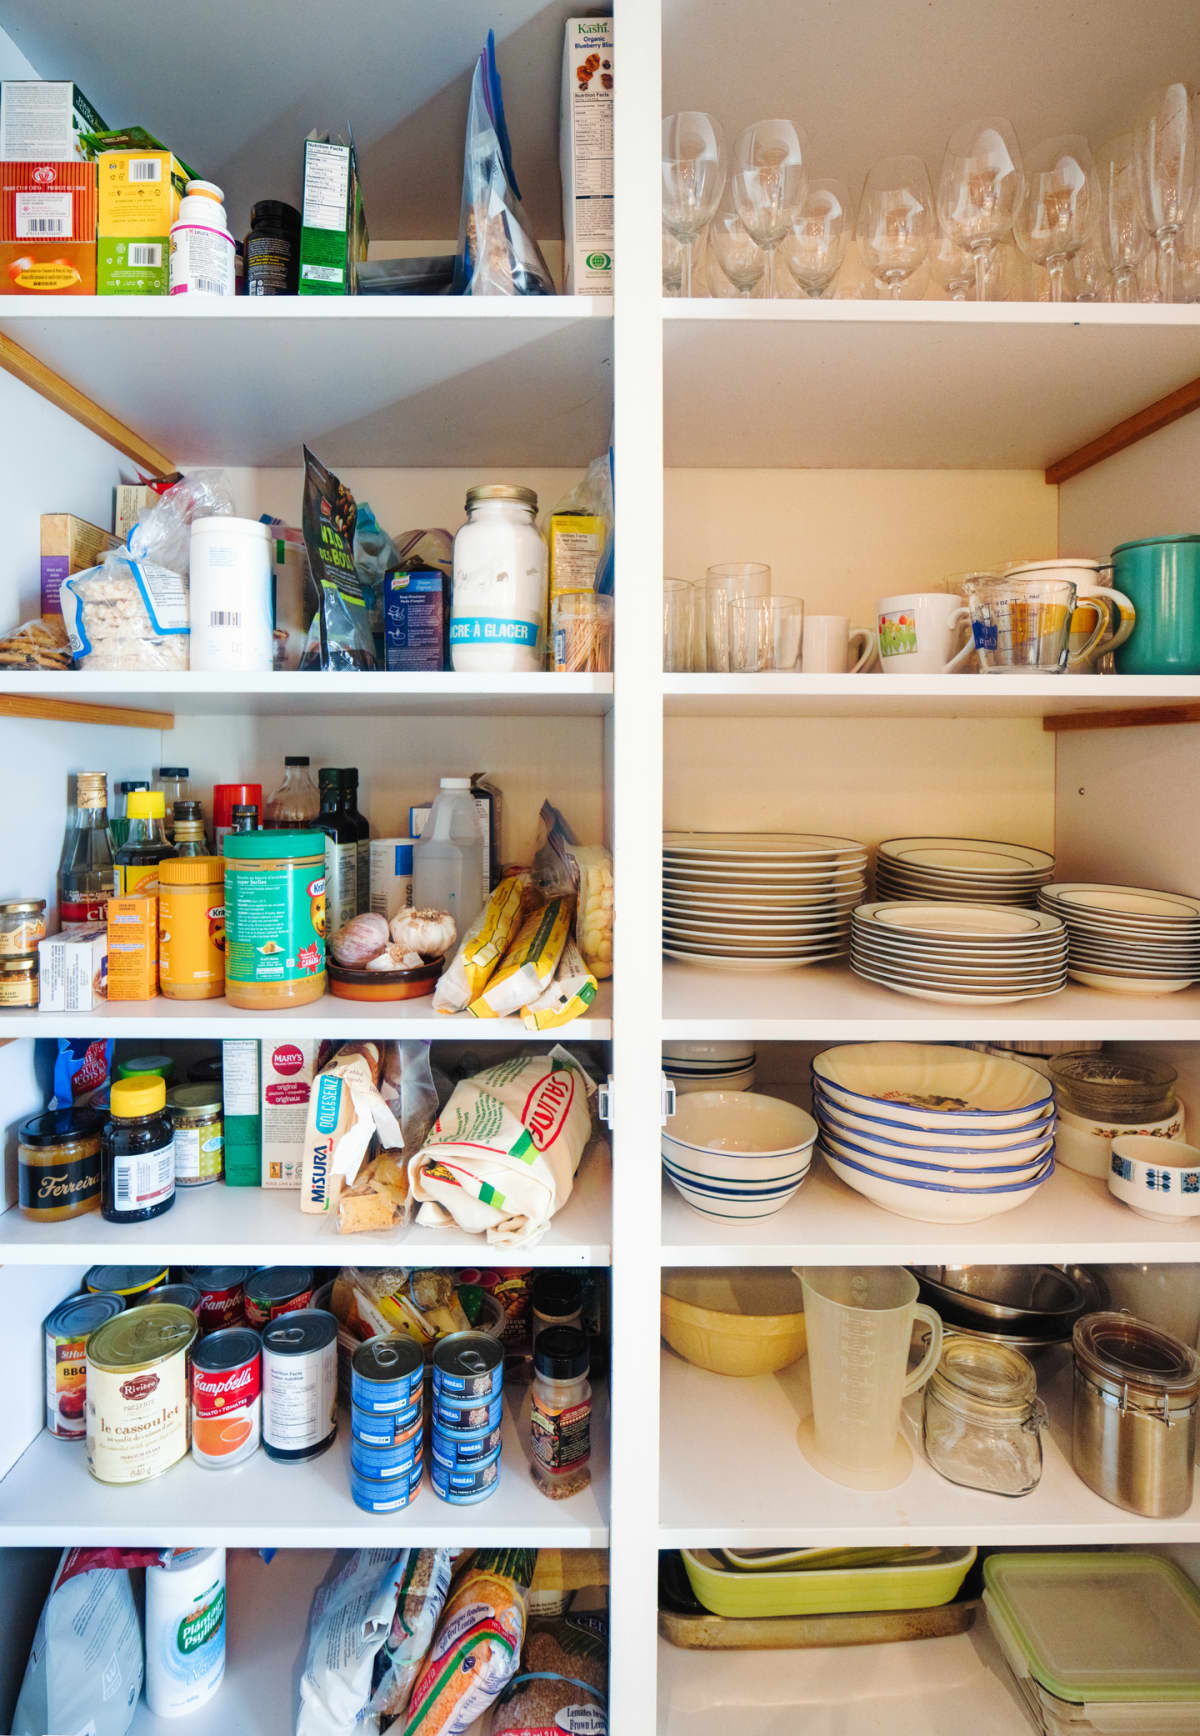 A kitchen pantry with open shelves.